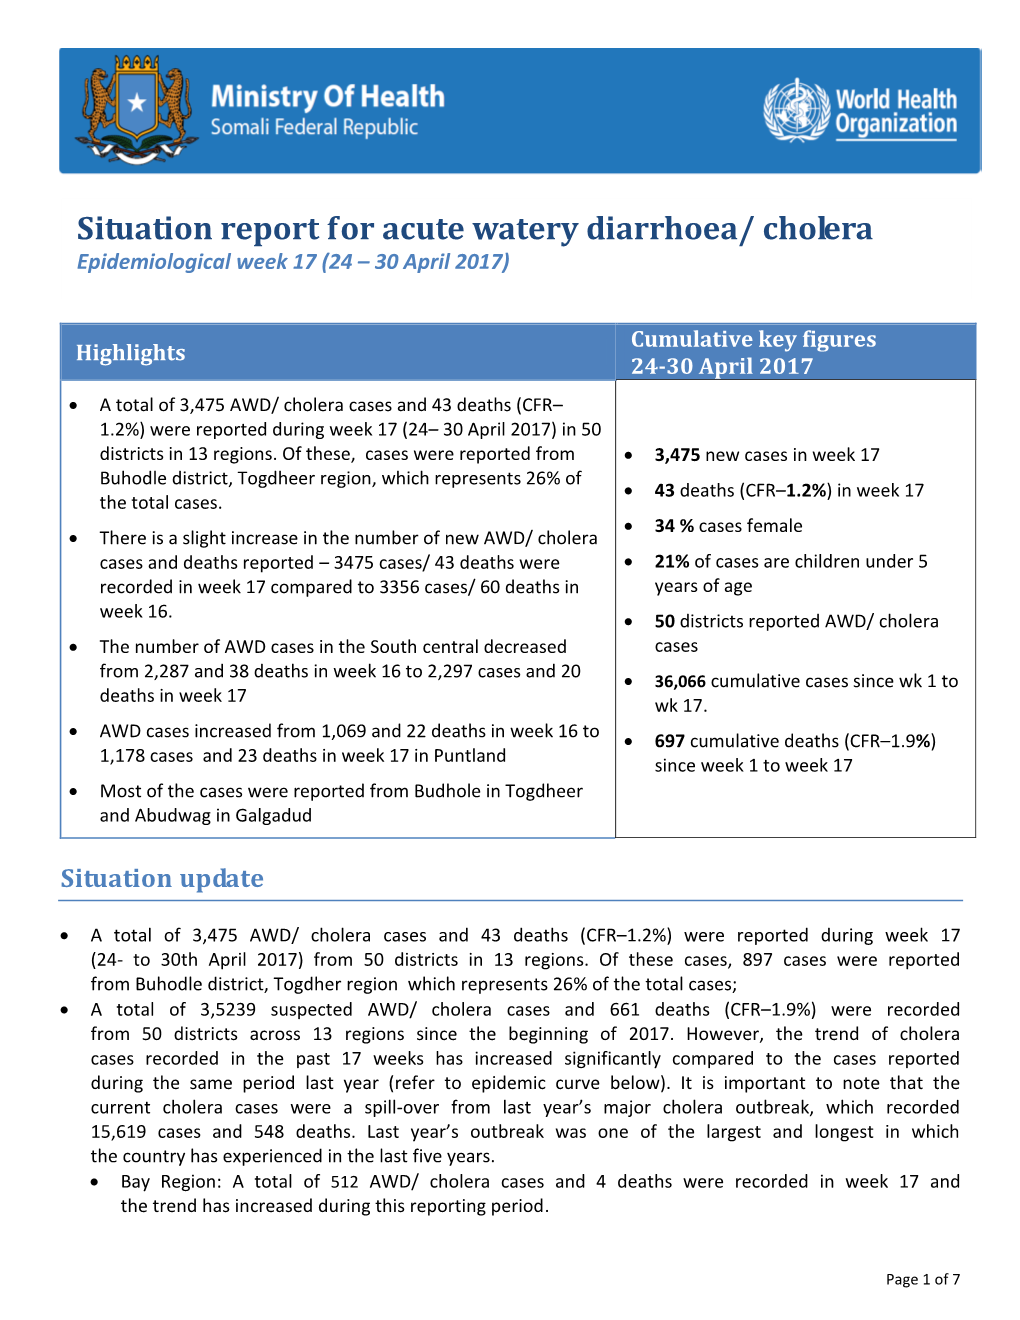 Situation Report for Acute Watery Diarrhoea/ Cholera Epidemiological Week 17 (24 – 30 April 2017)